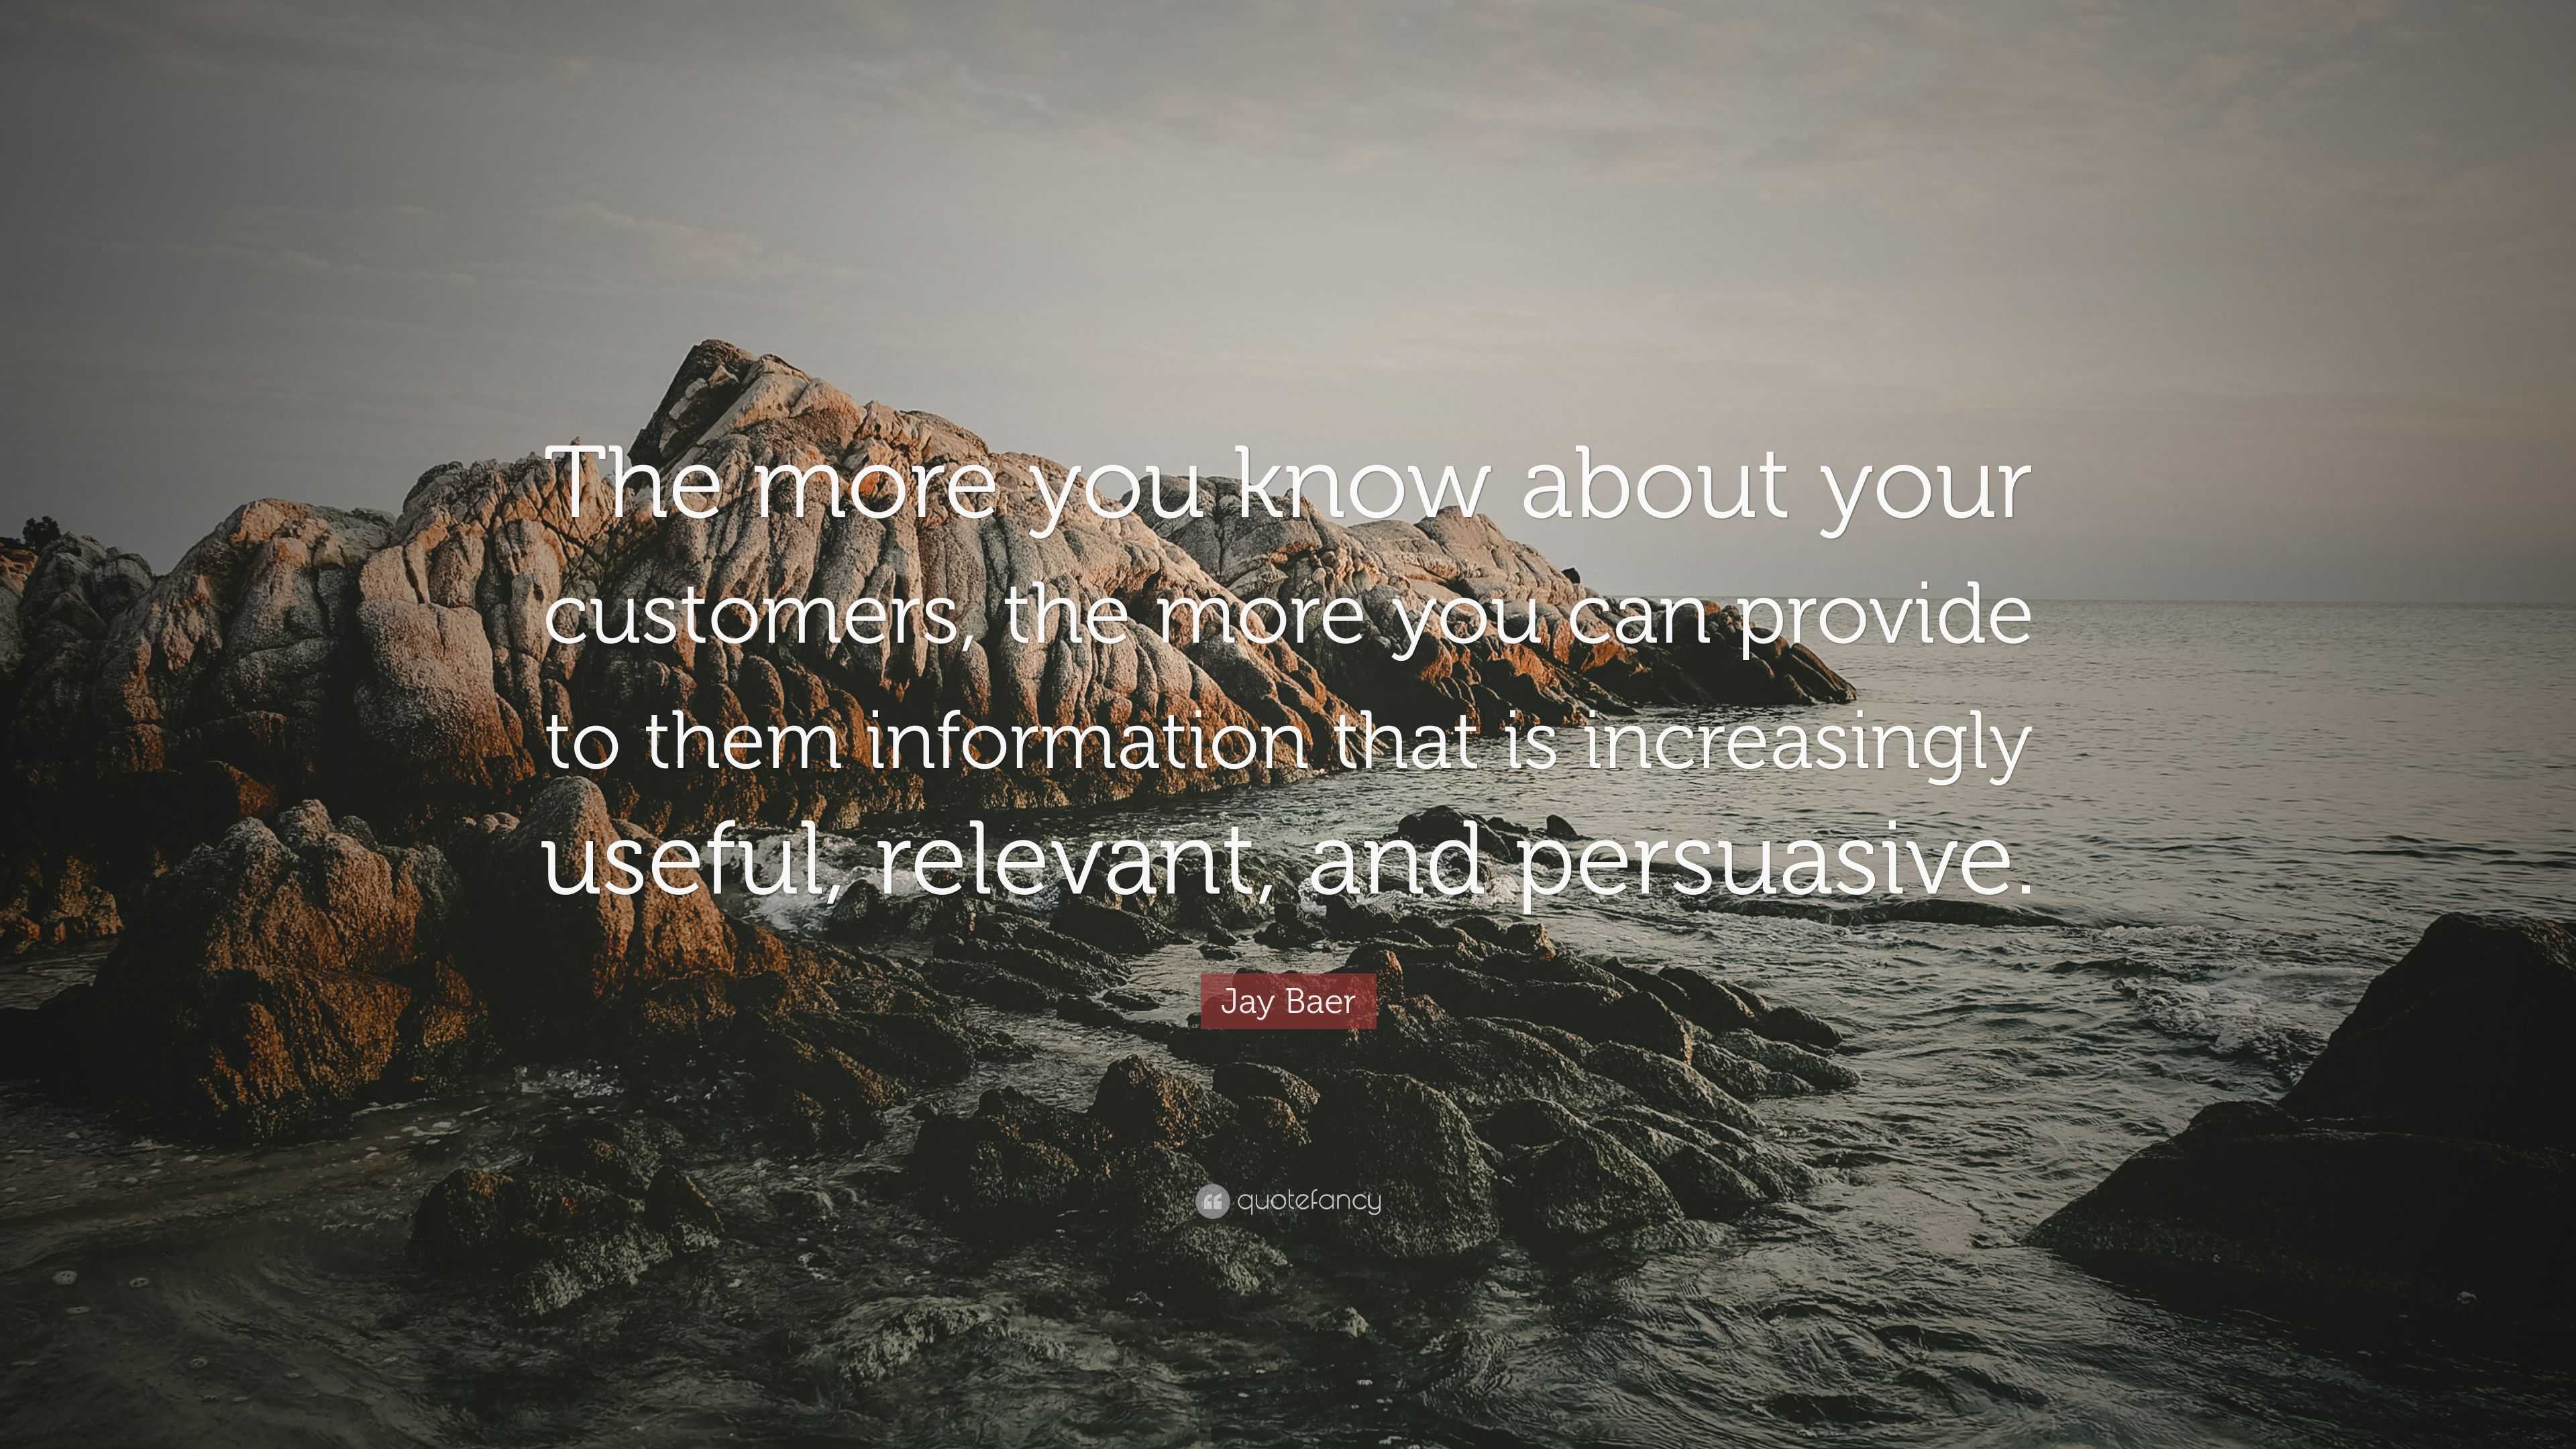 Jay Baer Quote: “The more you know about your customers, the more you